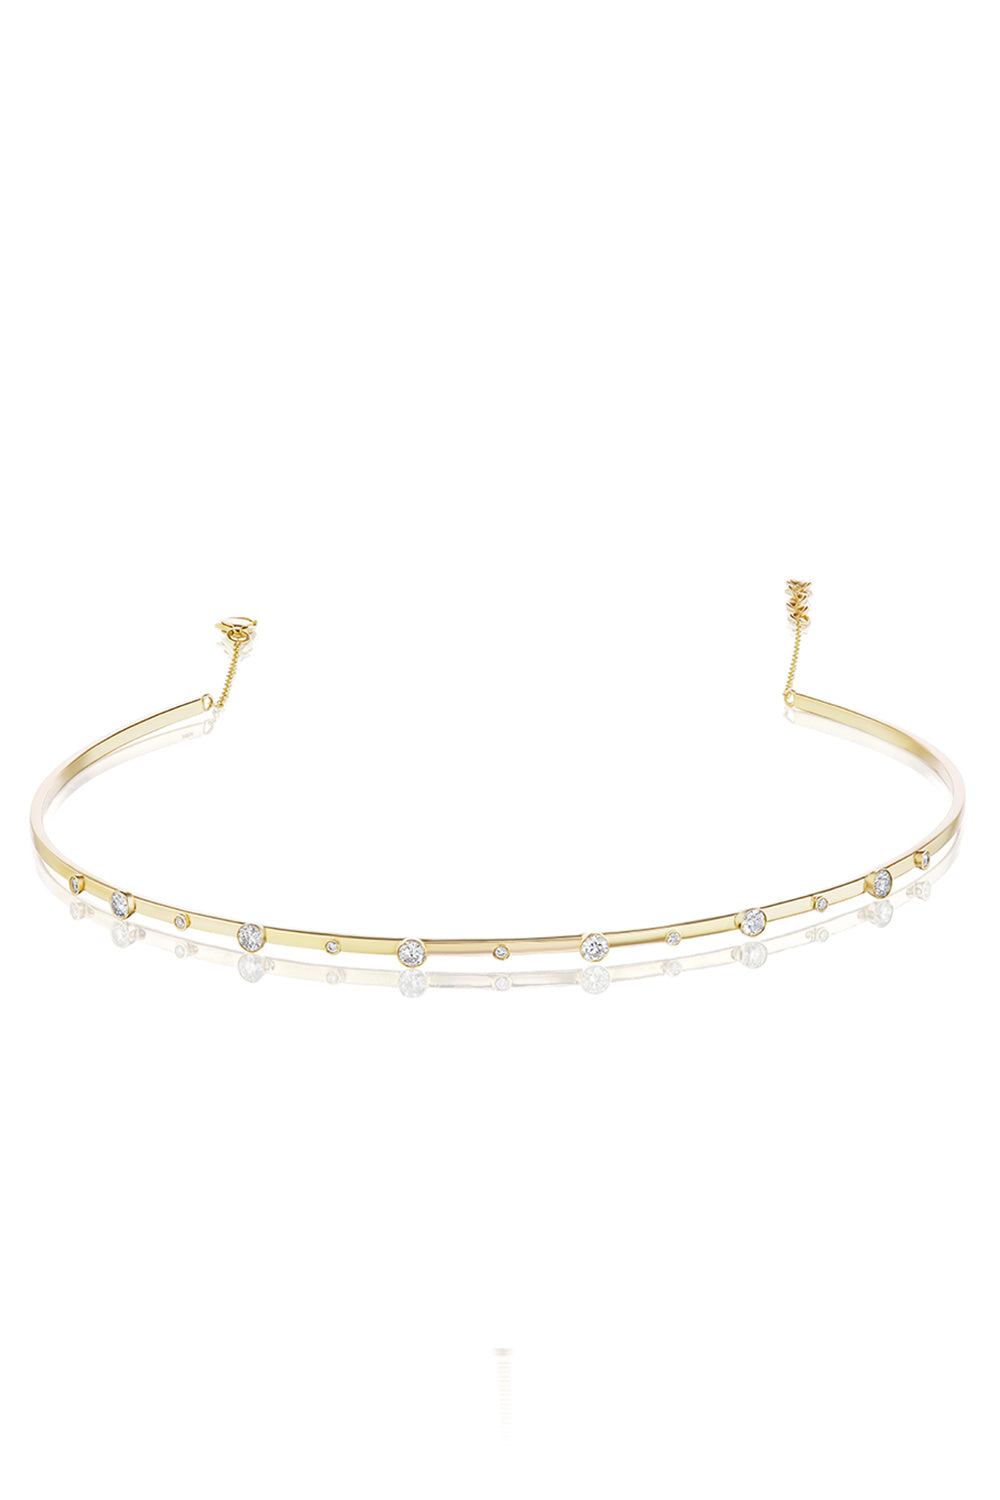 Bezel Stand Out Choker in Yellow Gold